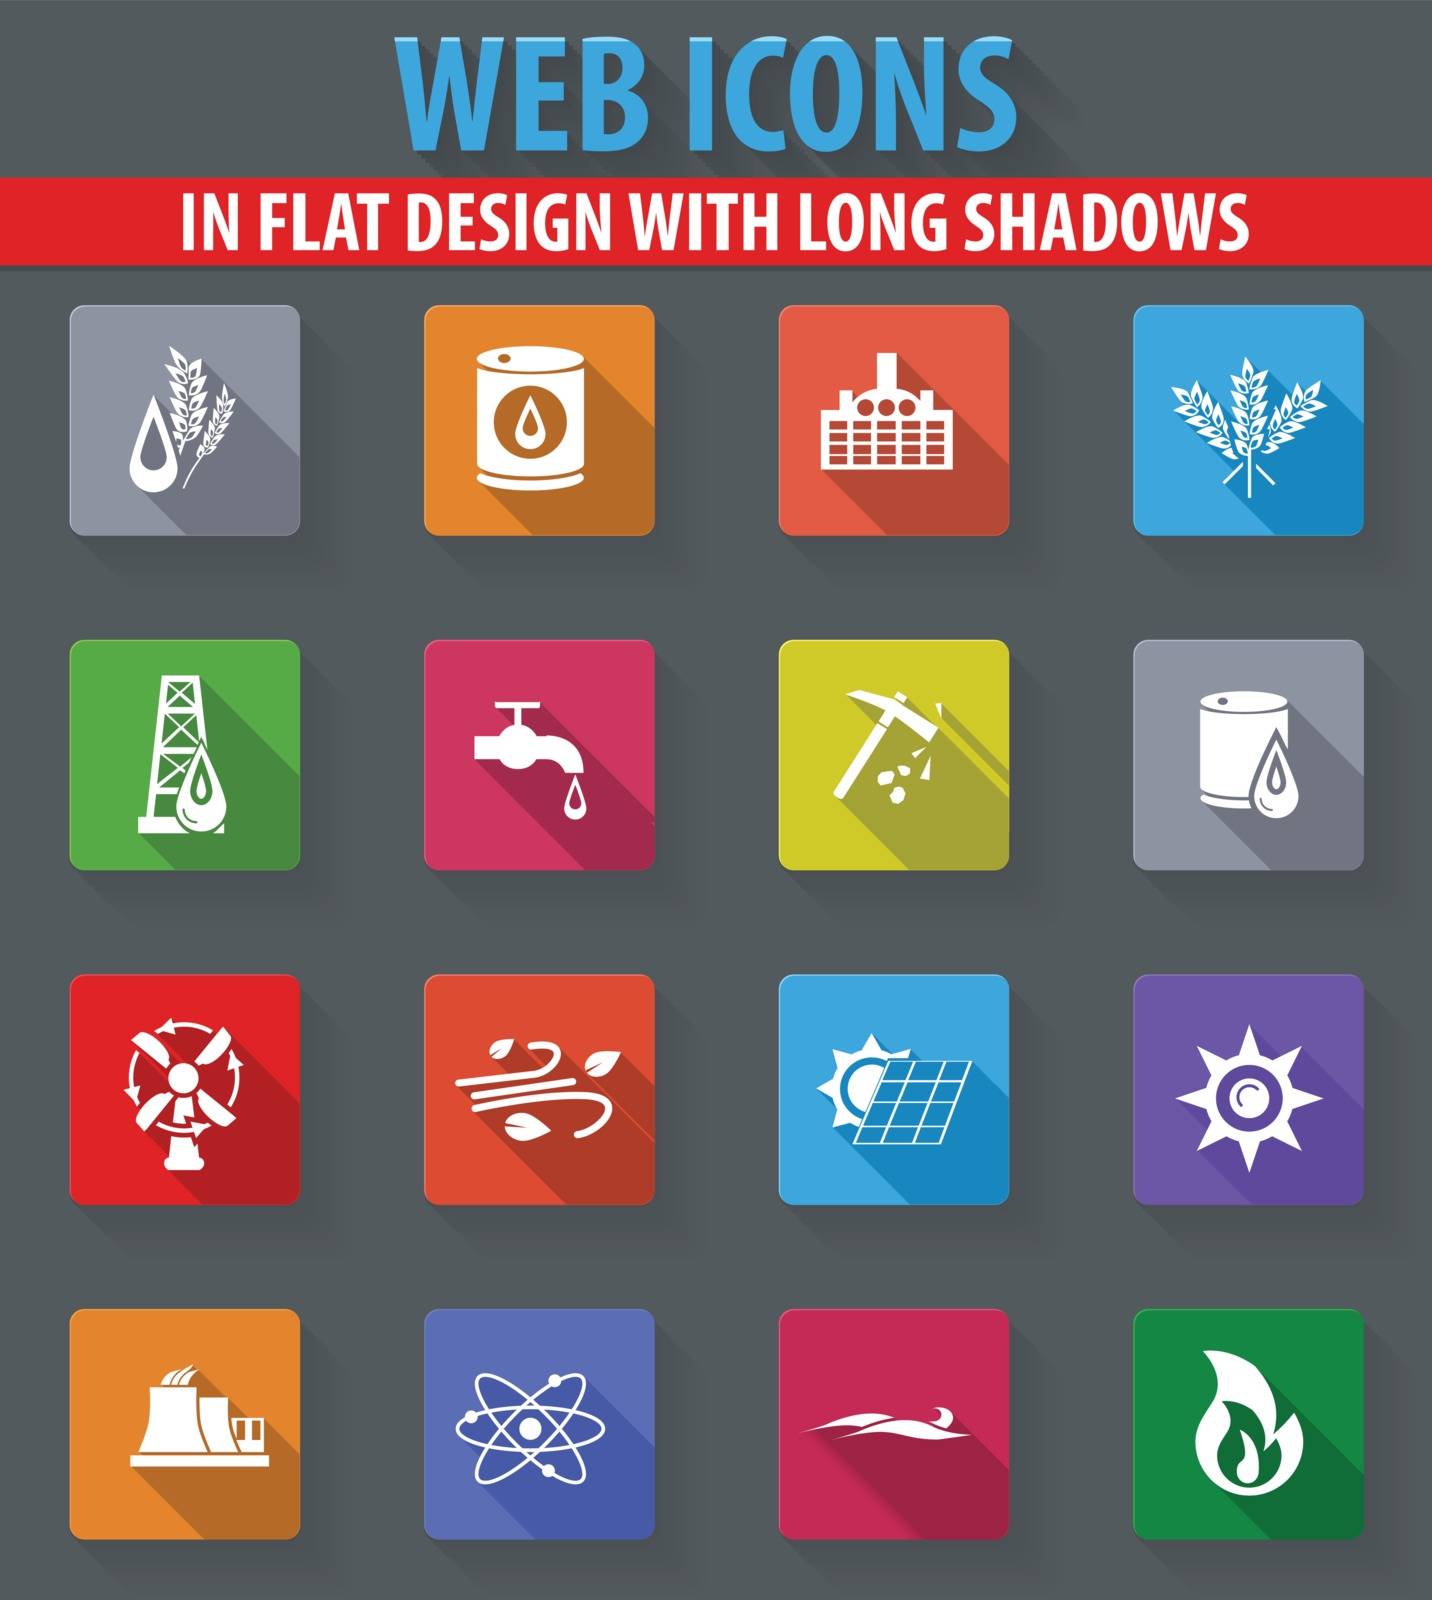 Fuel web icons in flat design with long shadows